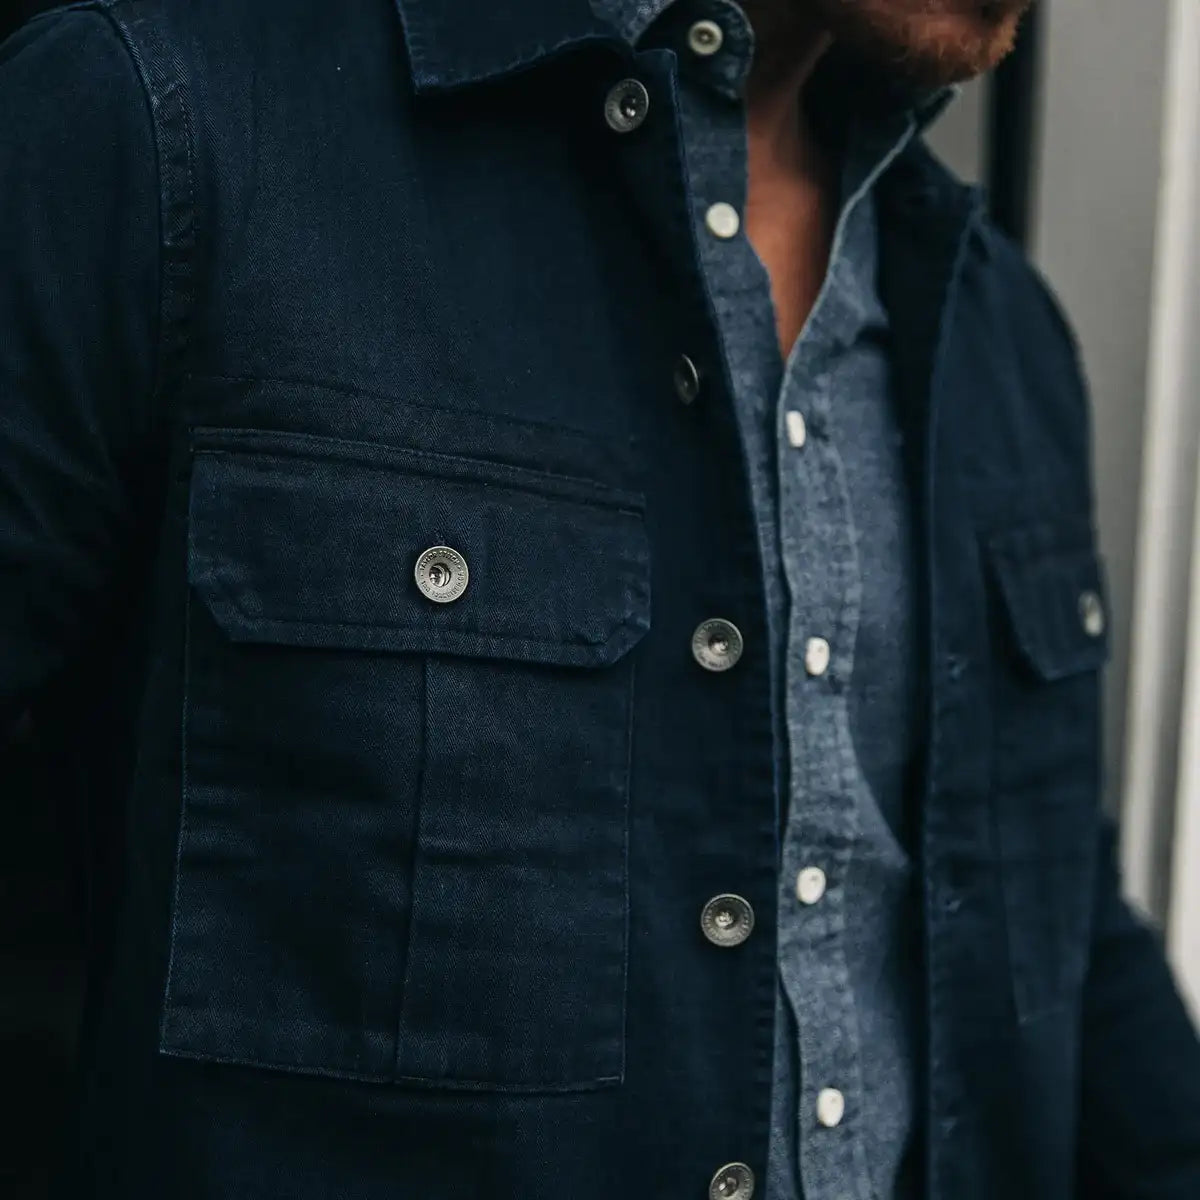 Taylor Stitch - TAYLOR STITCH THE HBT JACKET IN WASHED NAVY - Rent With Thred